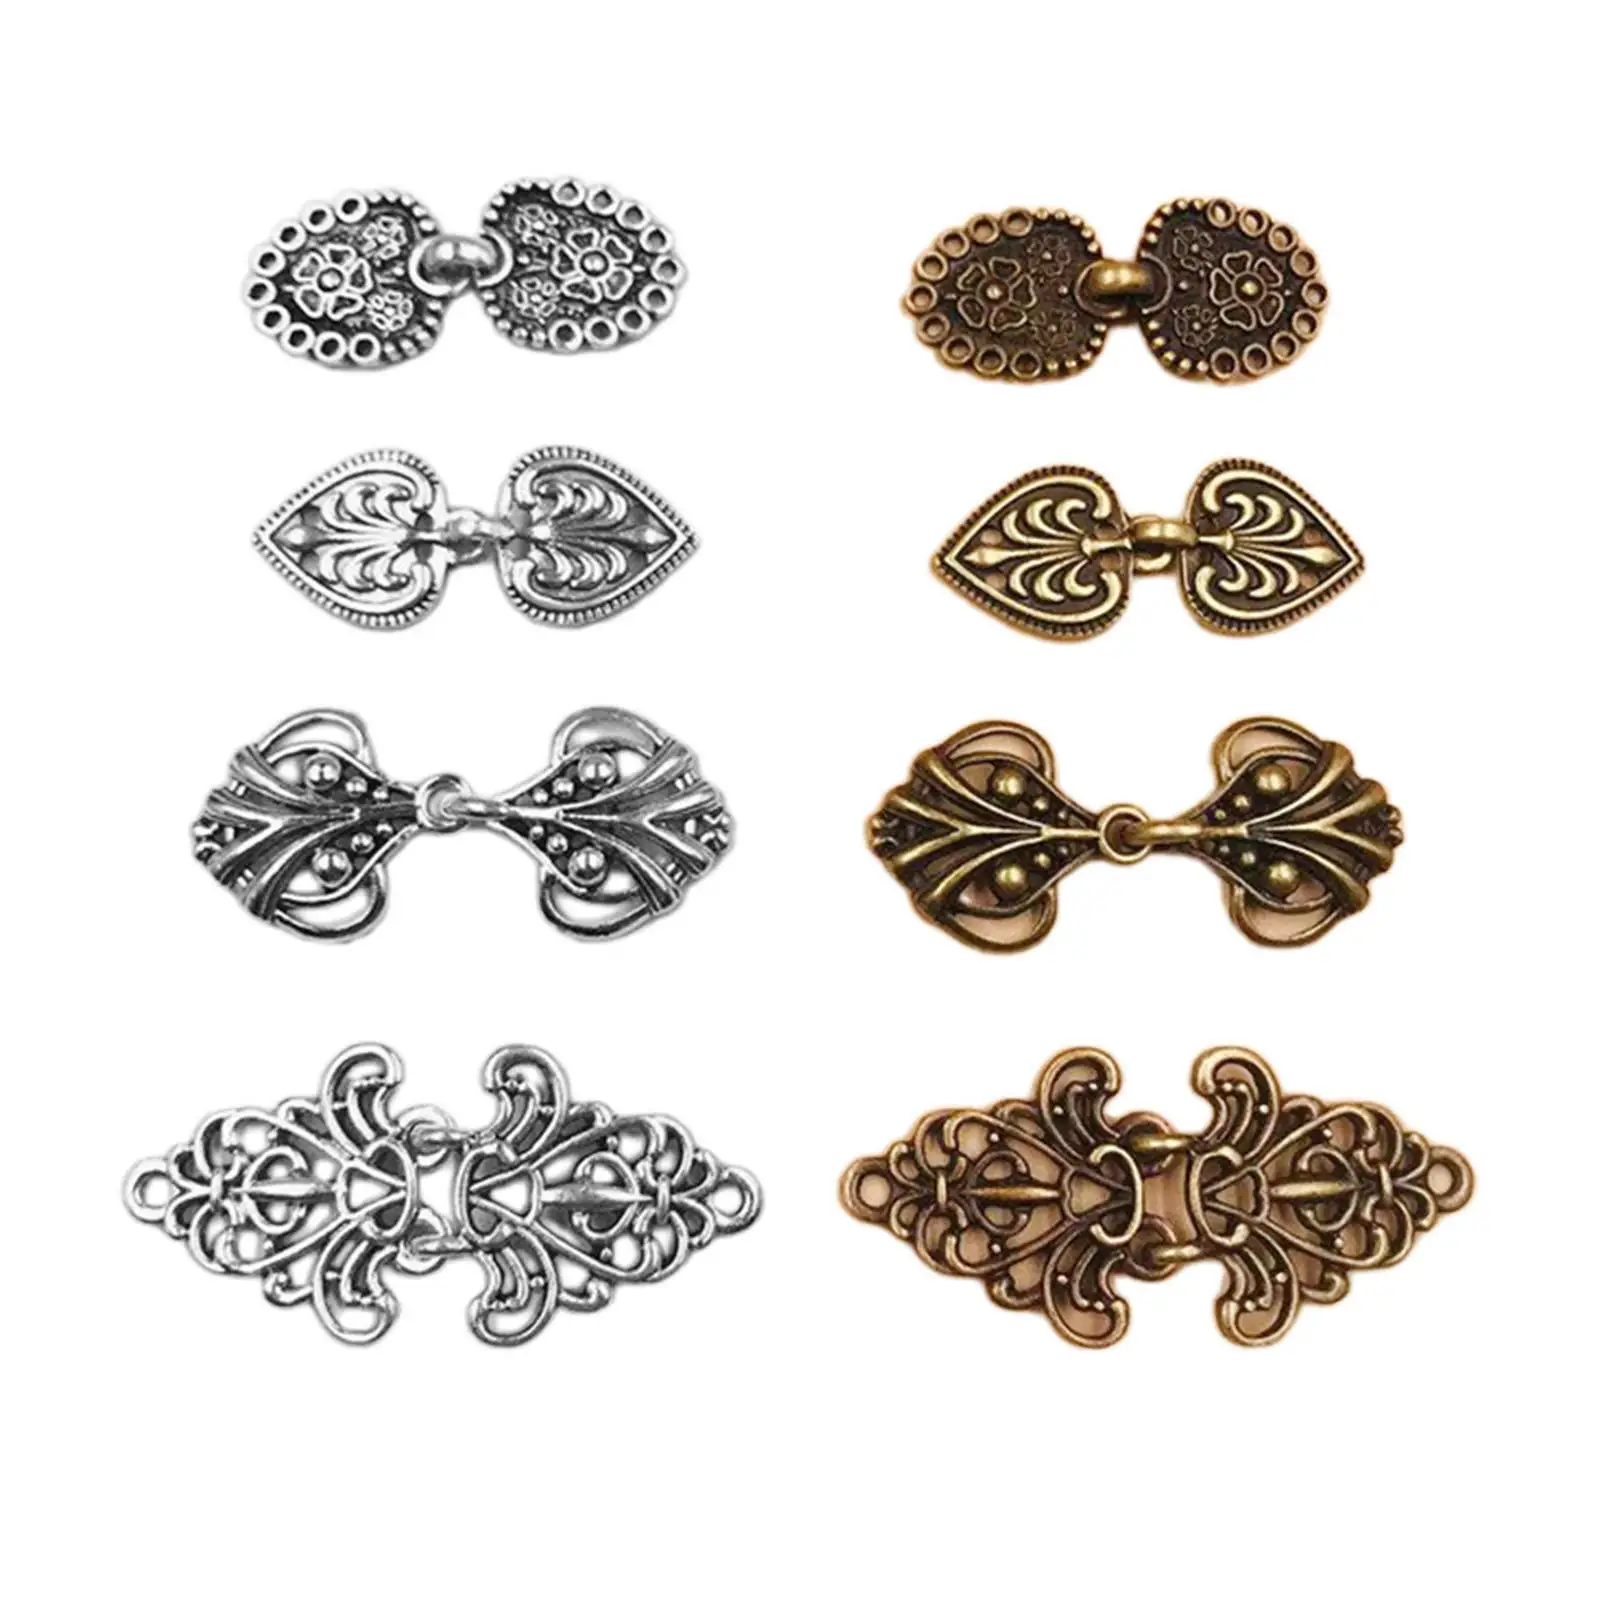 4 Pairs Women Clasp Fasteners Cardigan Clip Decorative Swirl Flower Cape or Cloak Clasp Fasteners Sew on Hooks and Eyes